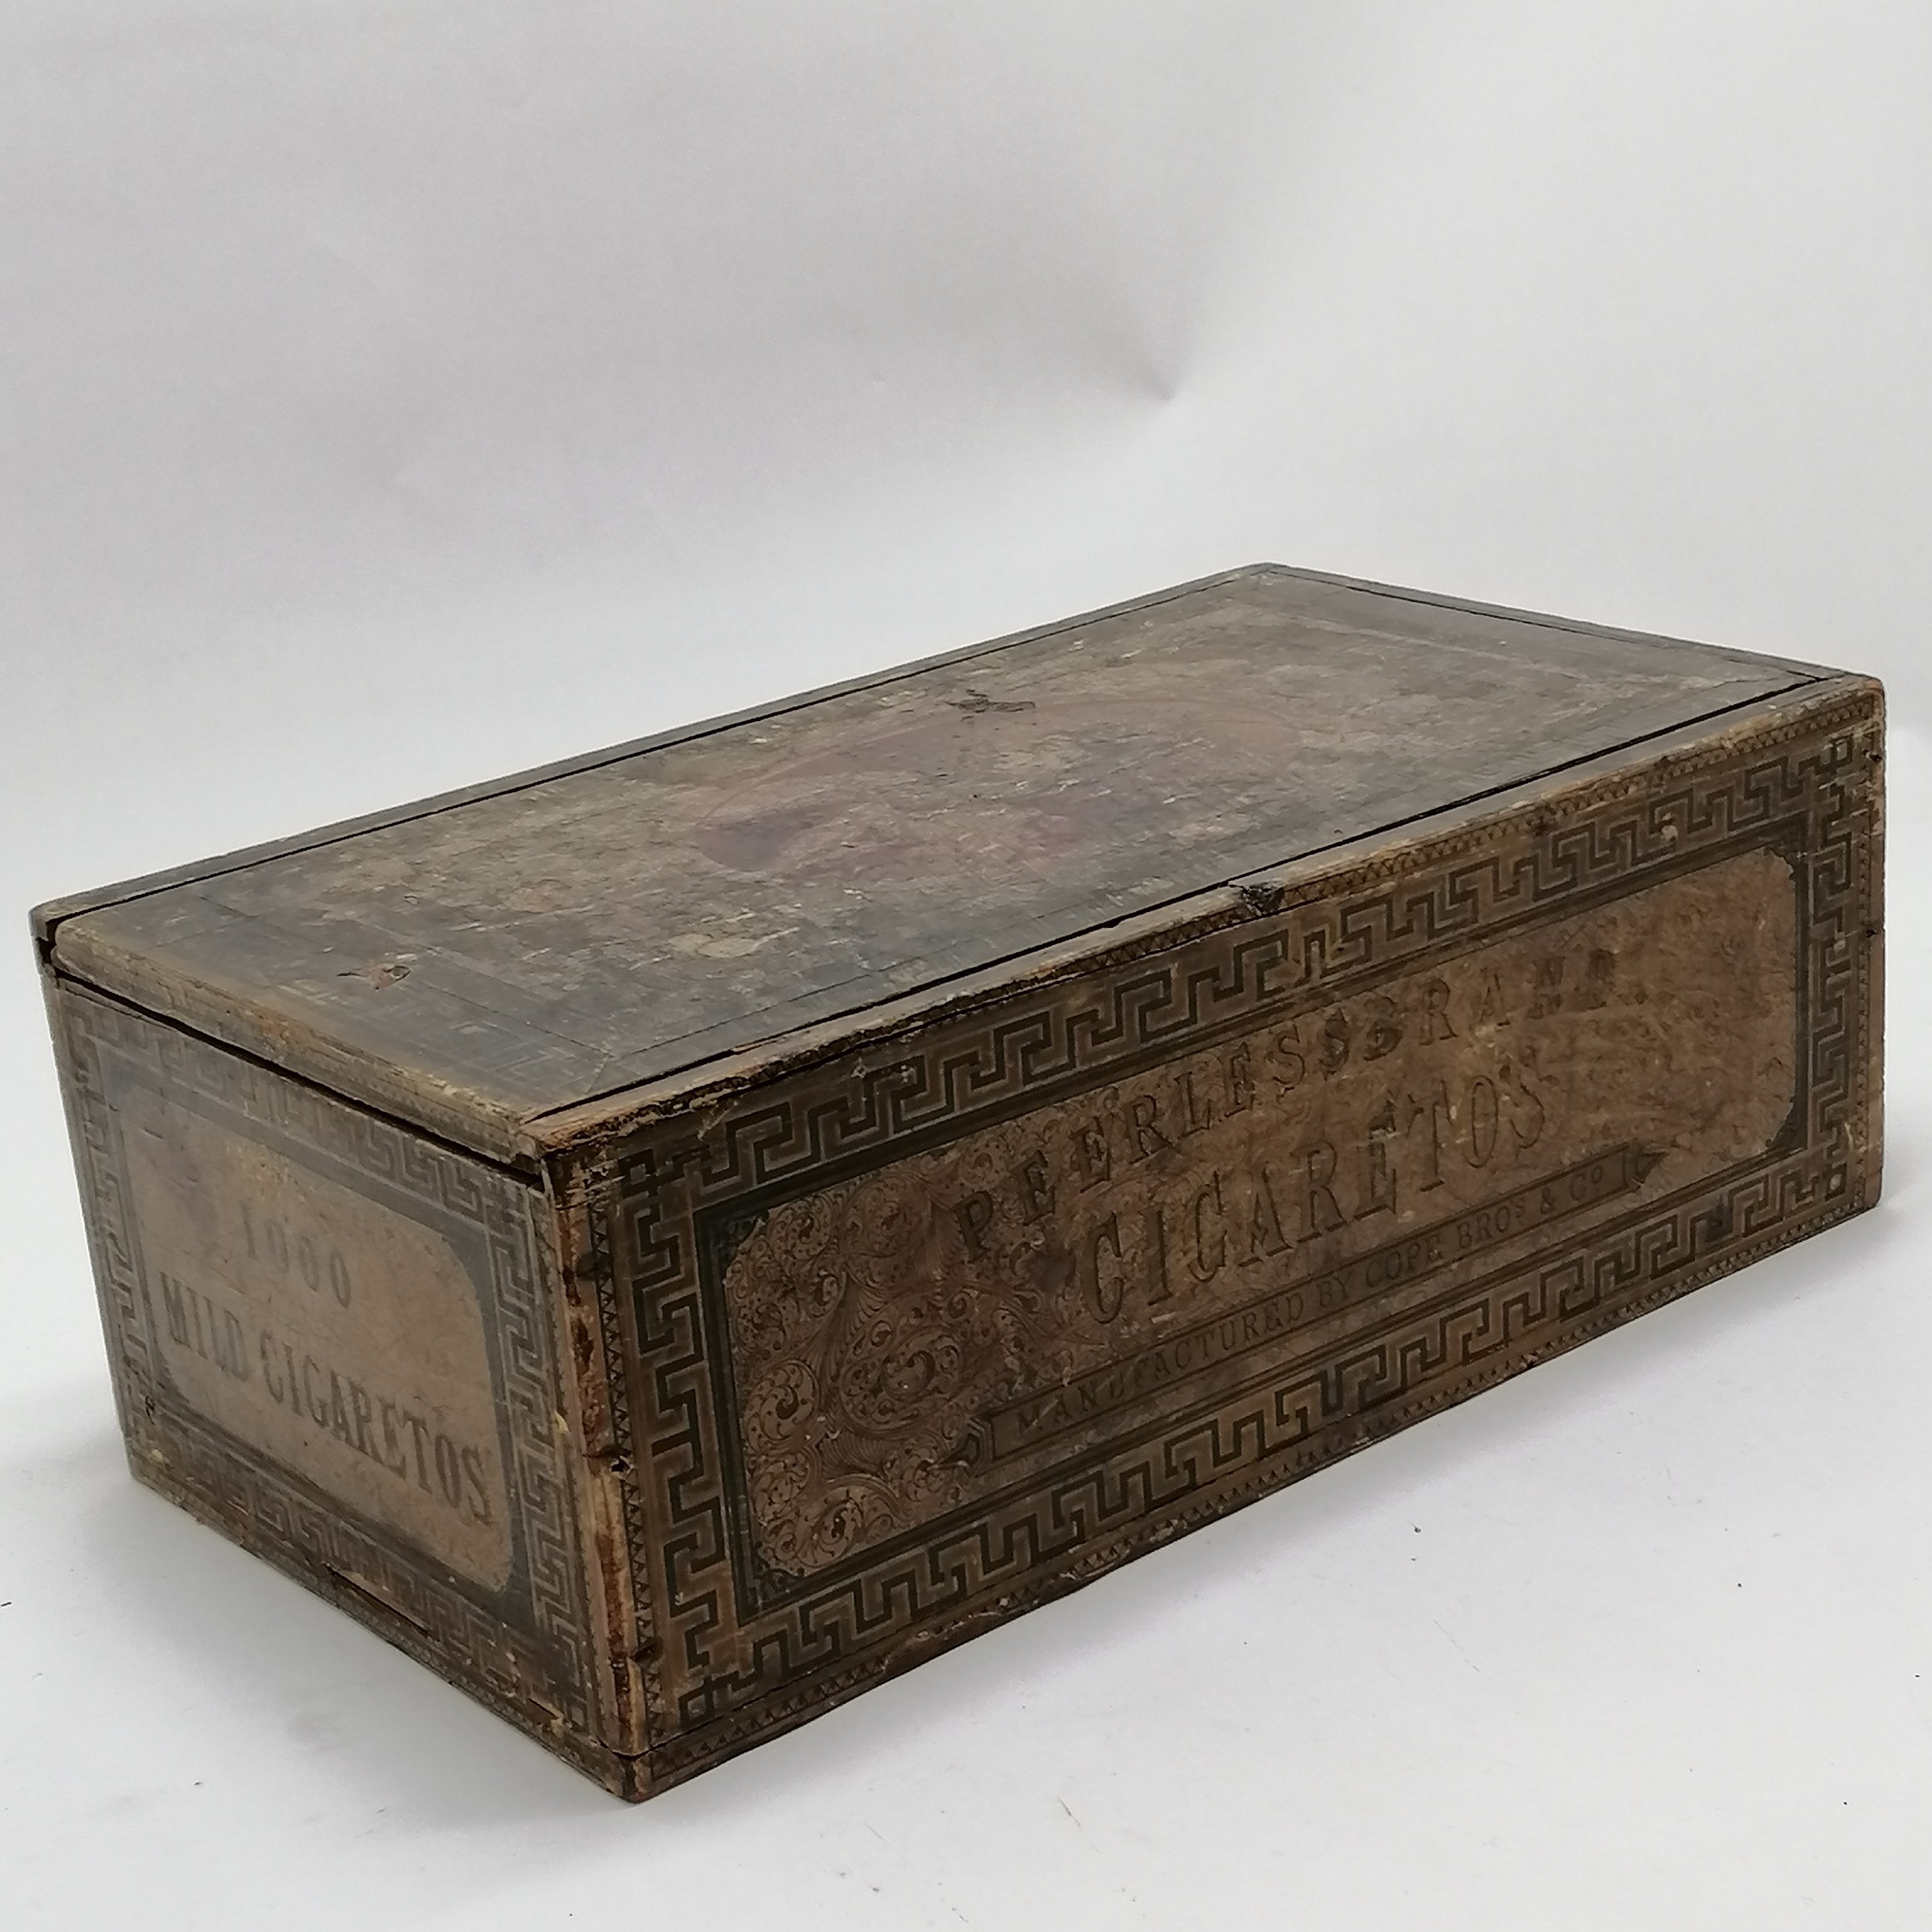 Antique Cope Bros 1000 cigarettes wooden advertising box with sliding lid & greek key detail - - Image 6 of 6